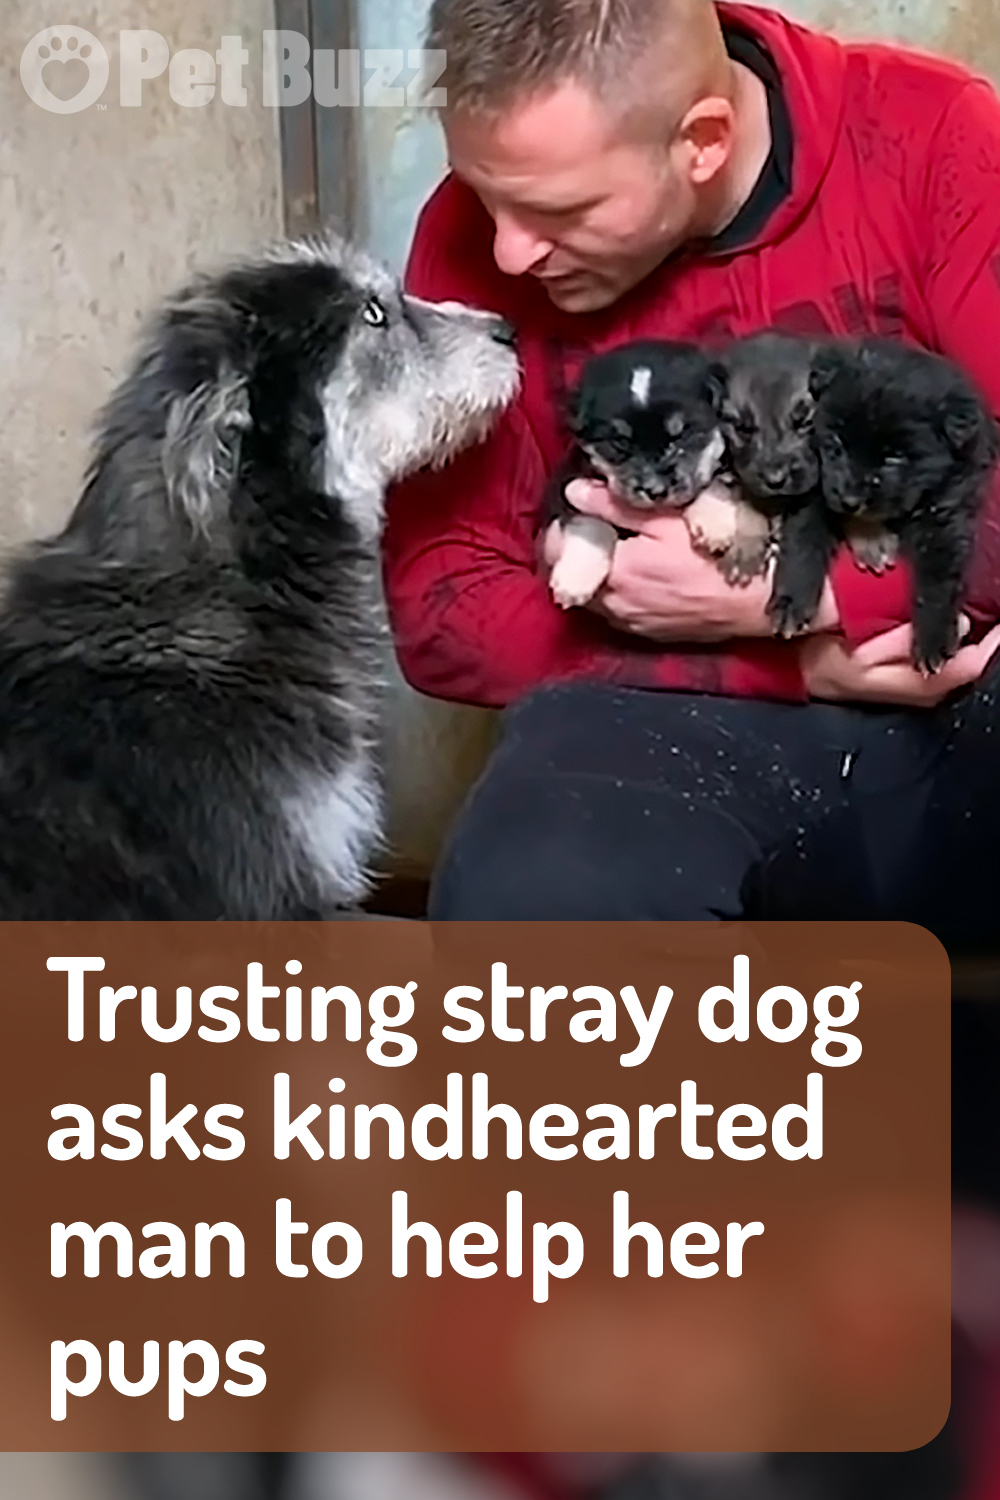 Trusting stray dog asks kindhearted man to help her pups